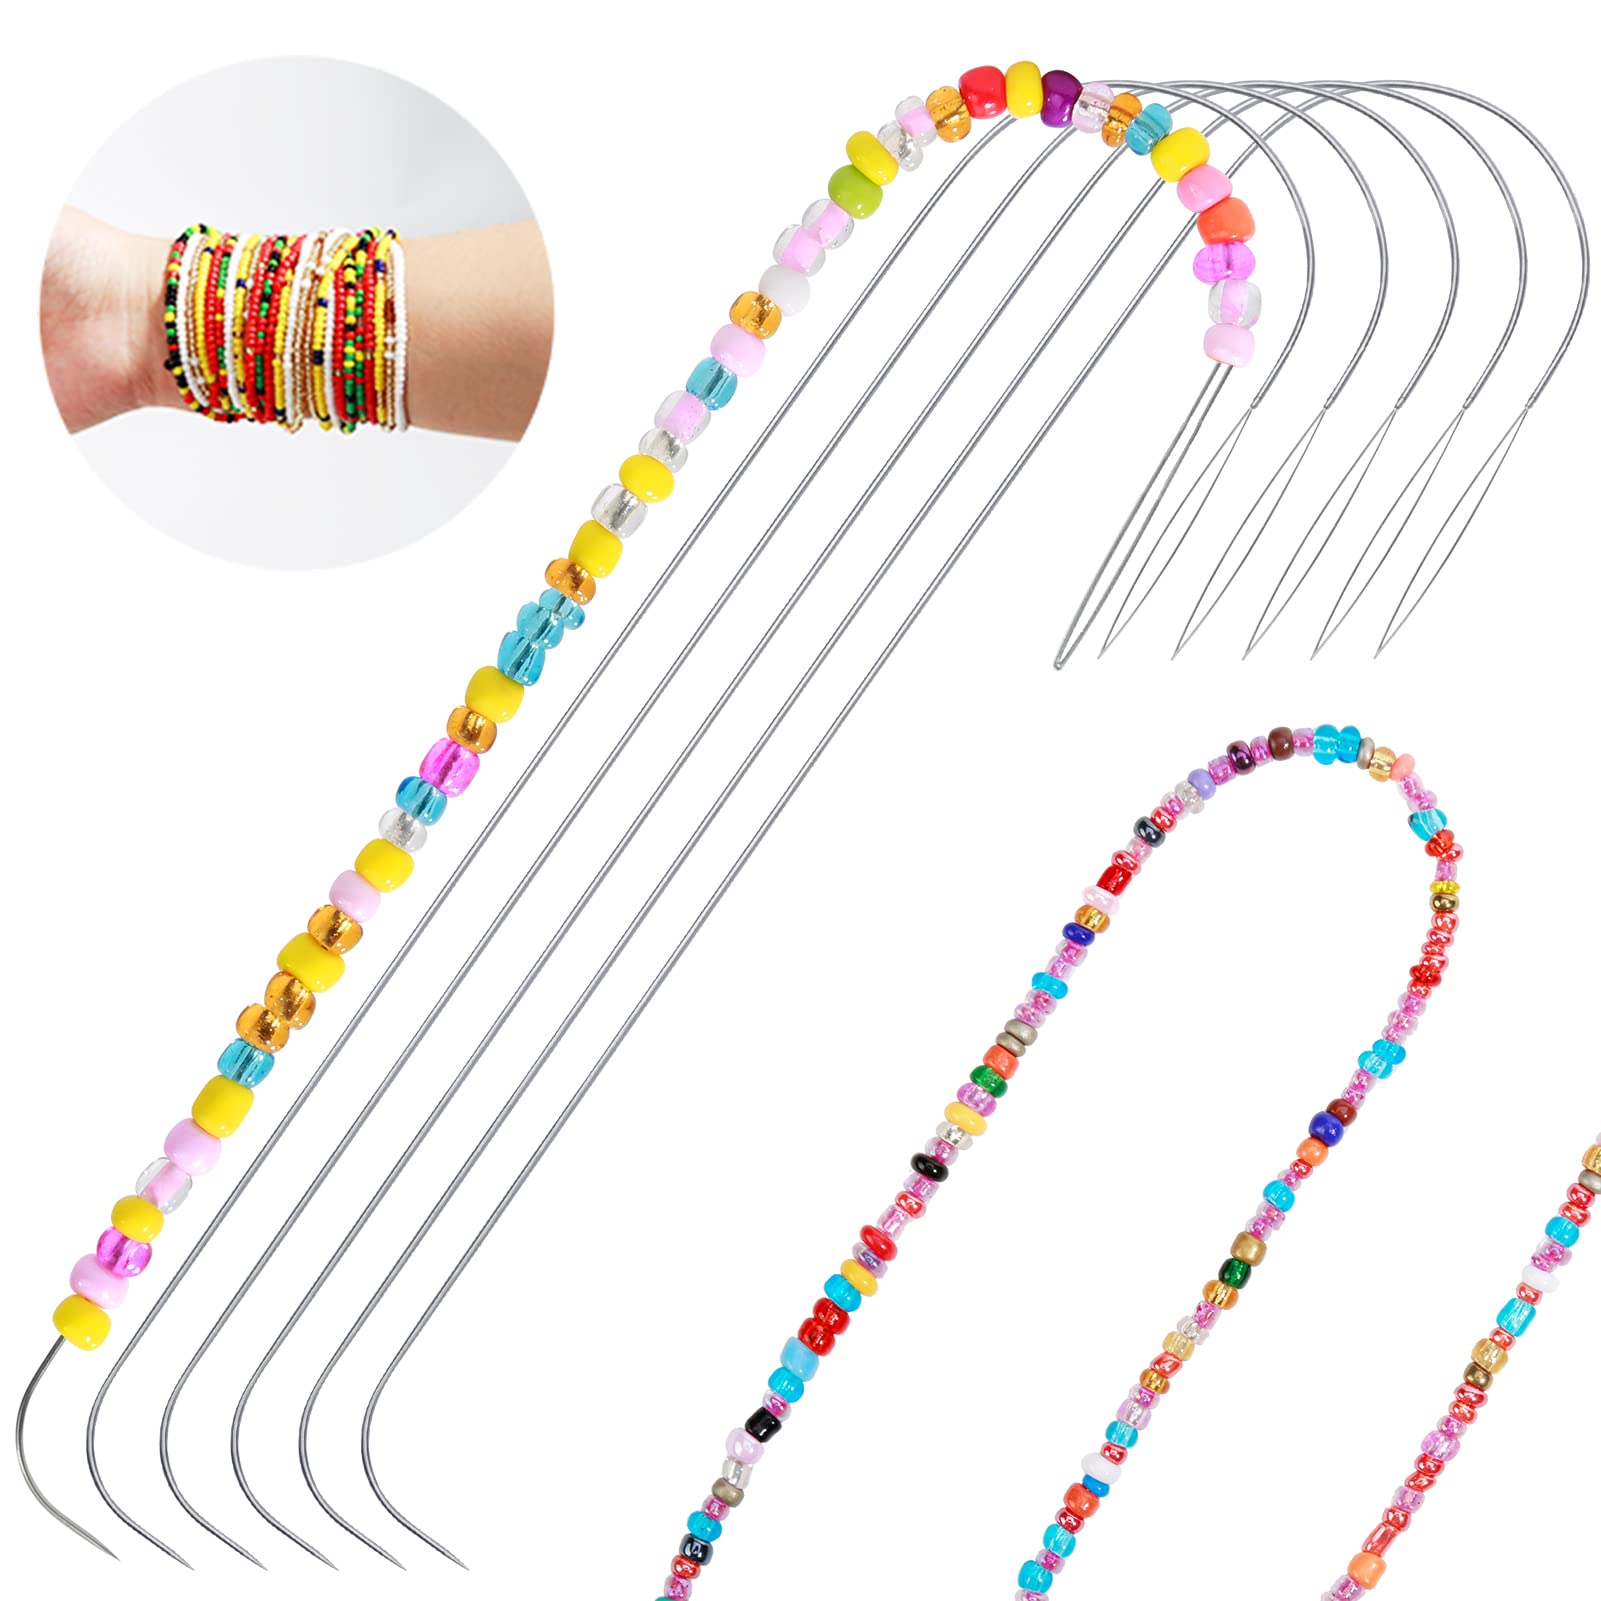 Bead Spinner Needle BLLNDX 9pcs 7.5 Inches Big Eye Curved Needles Steel Needle for String Seed Beads Jewelry Making